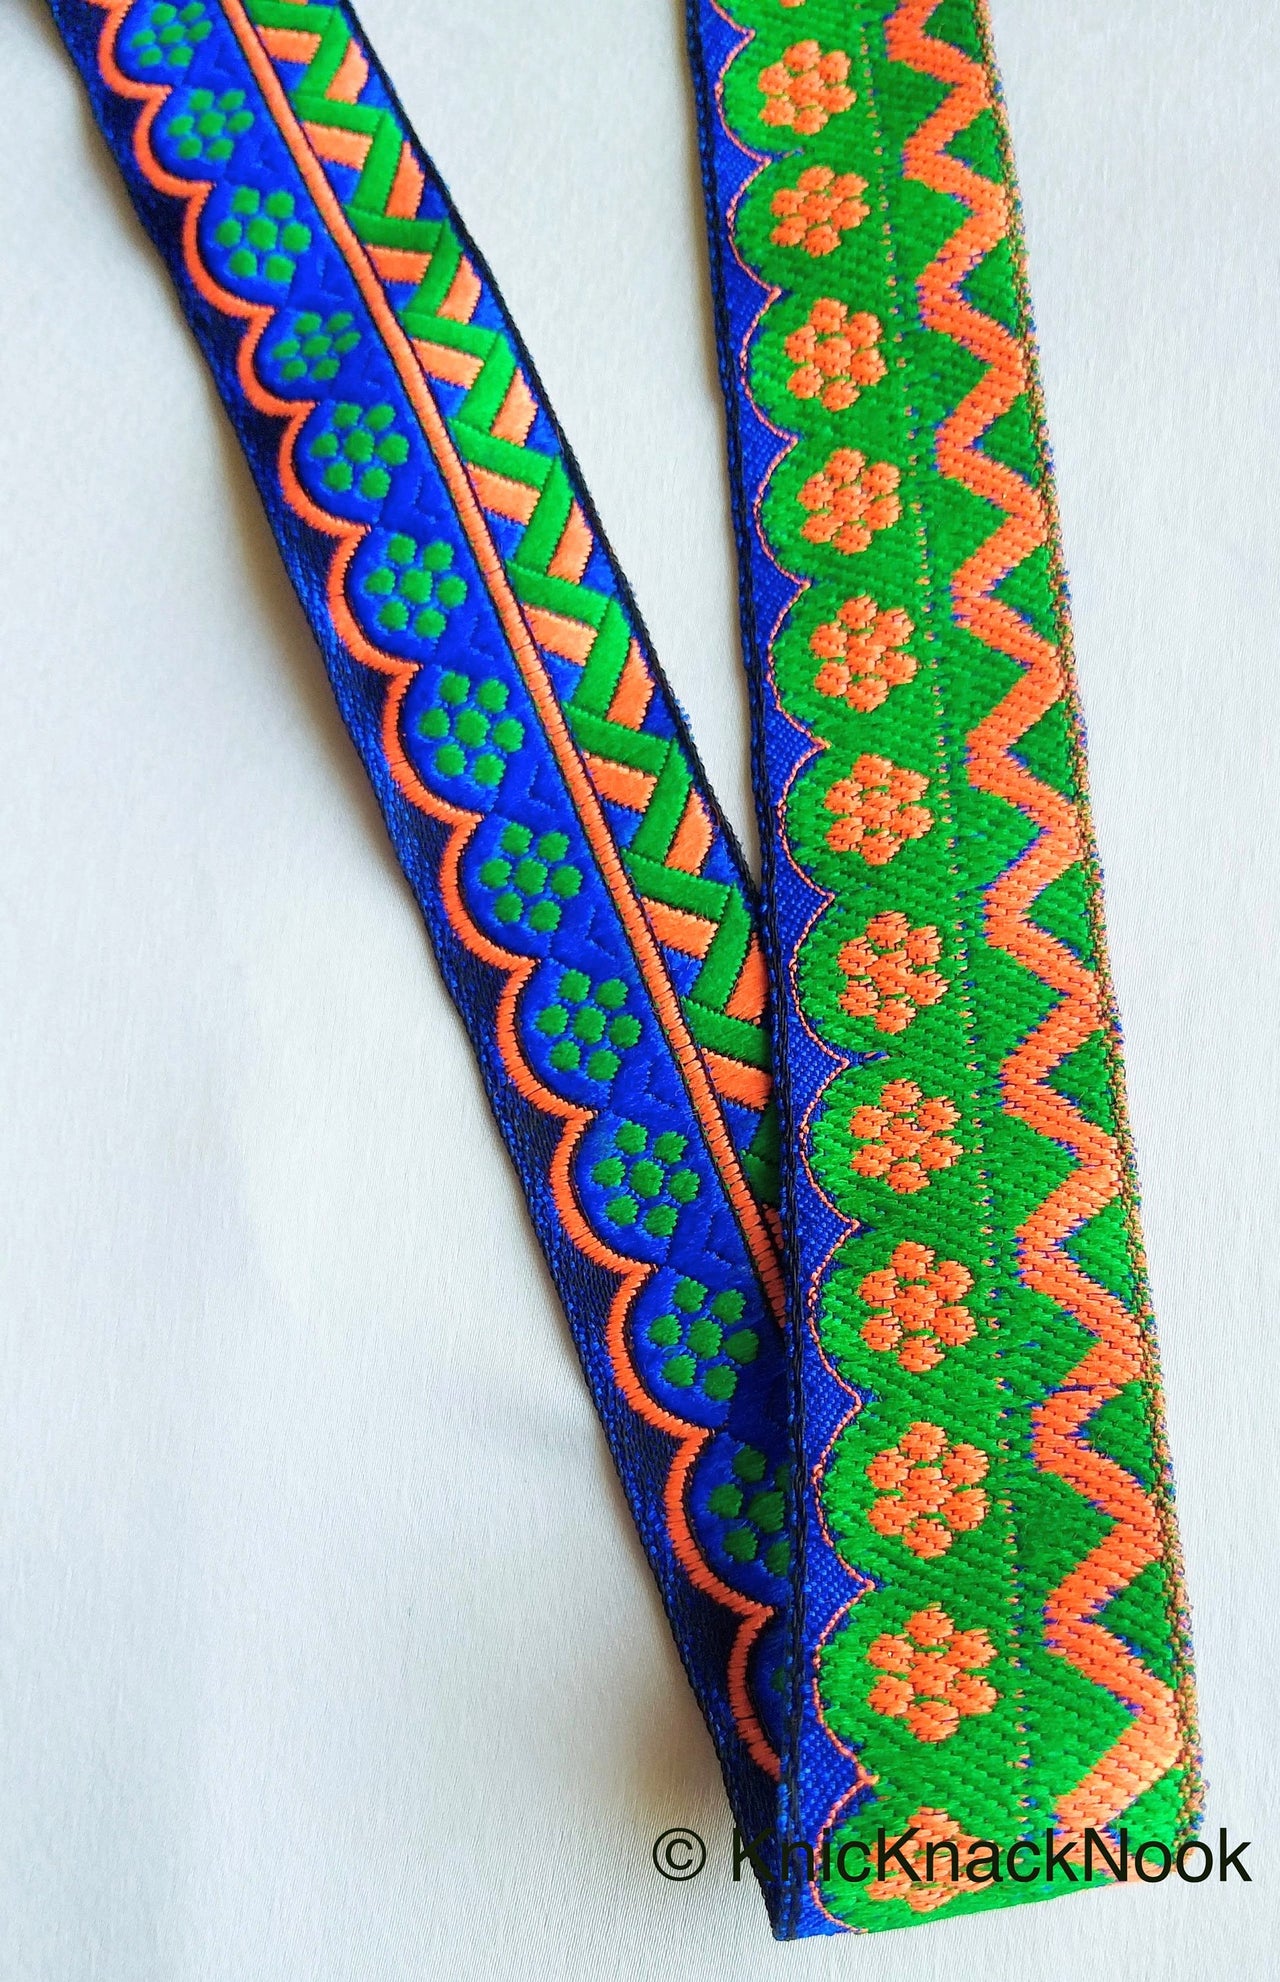 Blue, Green And Orange Trim With Floral Embroidery, Approx. 32mm Wide - 210119L59